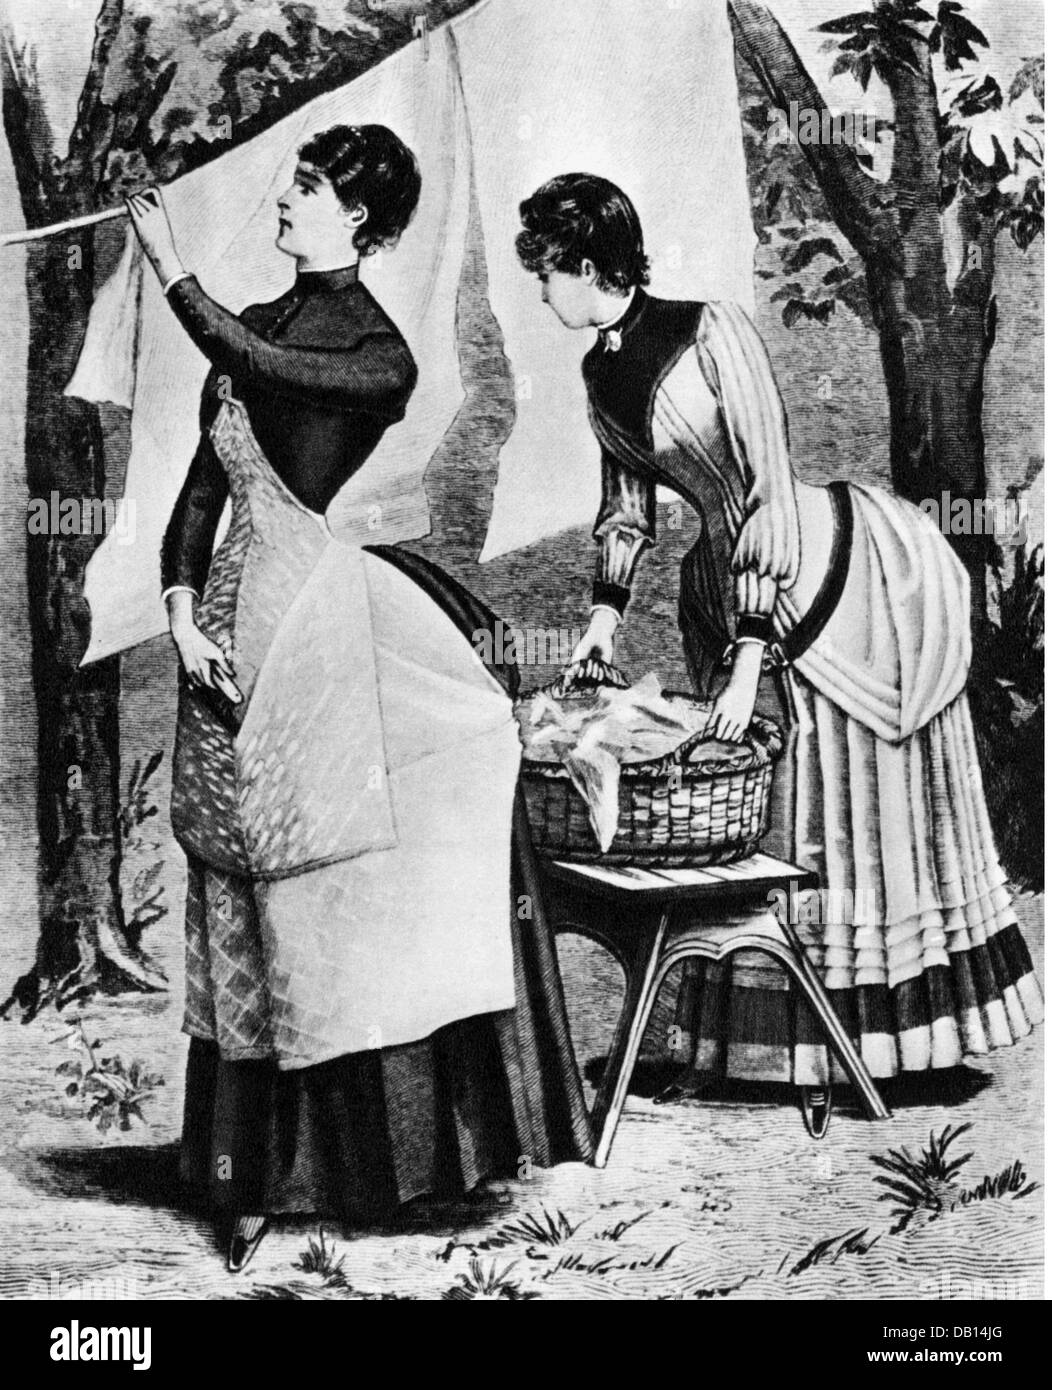 household,laundry washing,housewifes hanging laundry on the clothesline,wood engraving,19th century,19th century,graphic,graphics,household,households,domestic work,housework,household chores,do the chores,housekeep,half length,standing,clothesline,clotheslines,line,lines,hanging,hang,cloth,cloths,bag,bags,clothes peg,clothes pin,clothespin,clothes pegs,clothes pins,clothespins,laundry basket,linen basket,hamper,laundry baskets,linen baskets,hampers,drying,dry,washing,wash,housewife,housewives,homemaker,historic,hi,Additional-Rights-Clearences-Not Available Stock Photo